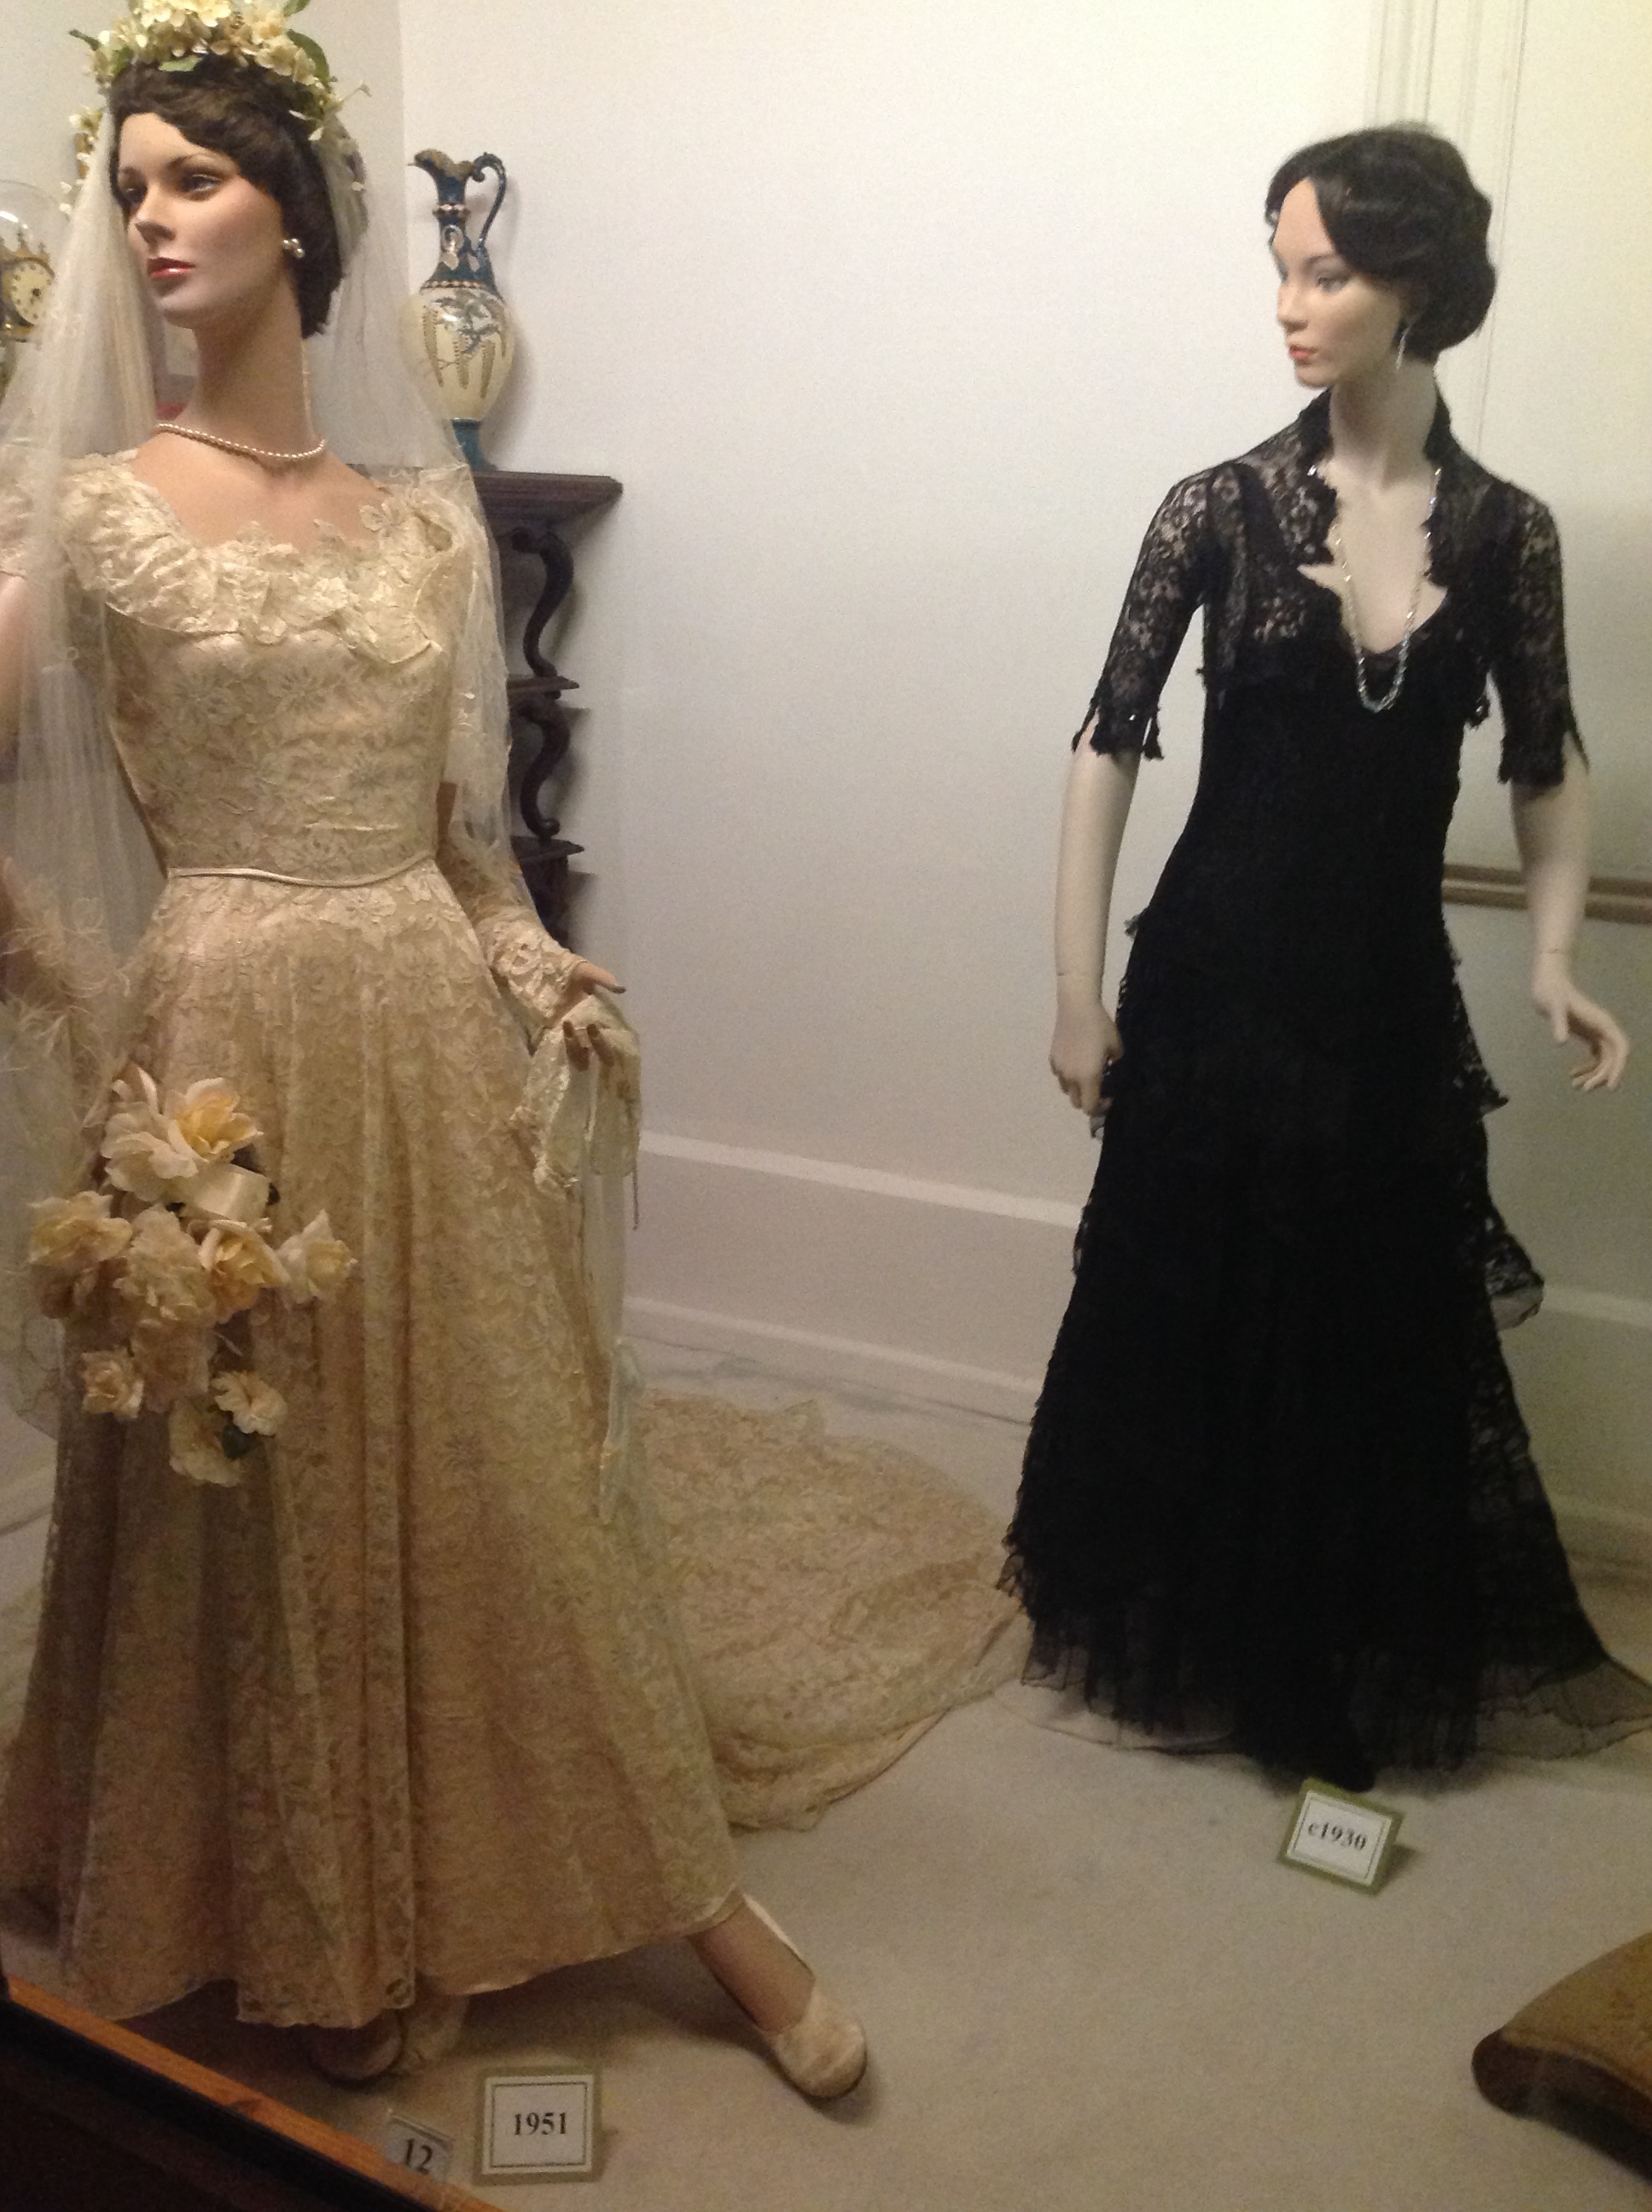  Two more examples of hand crafted costumes from Benella 